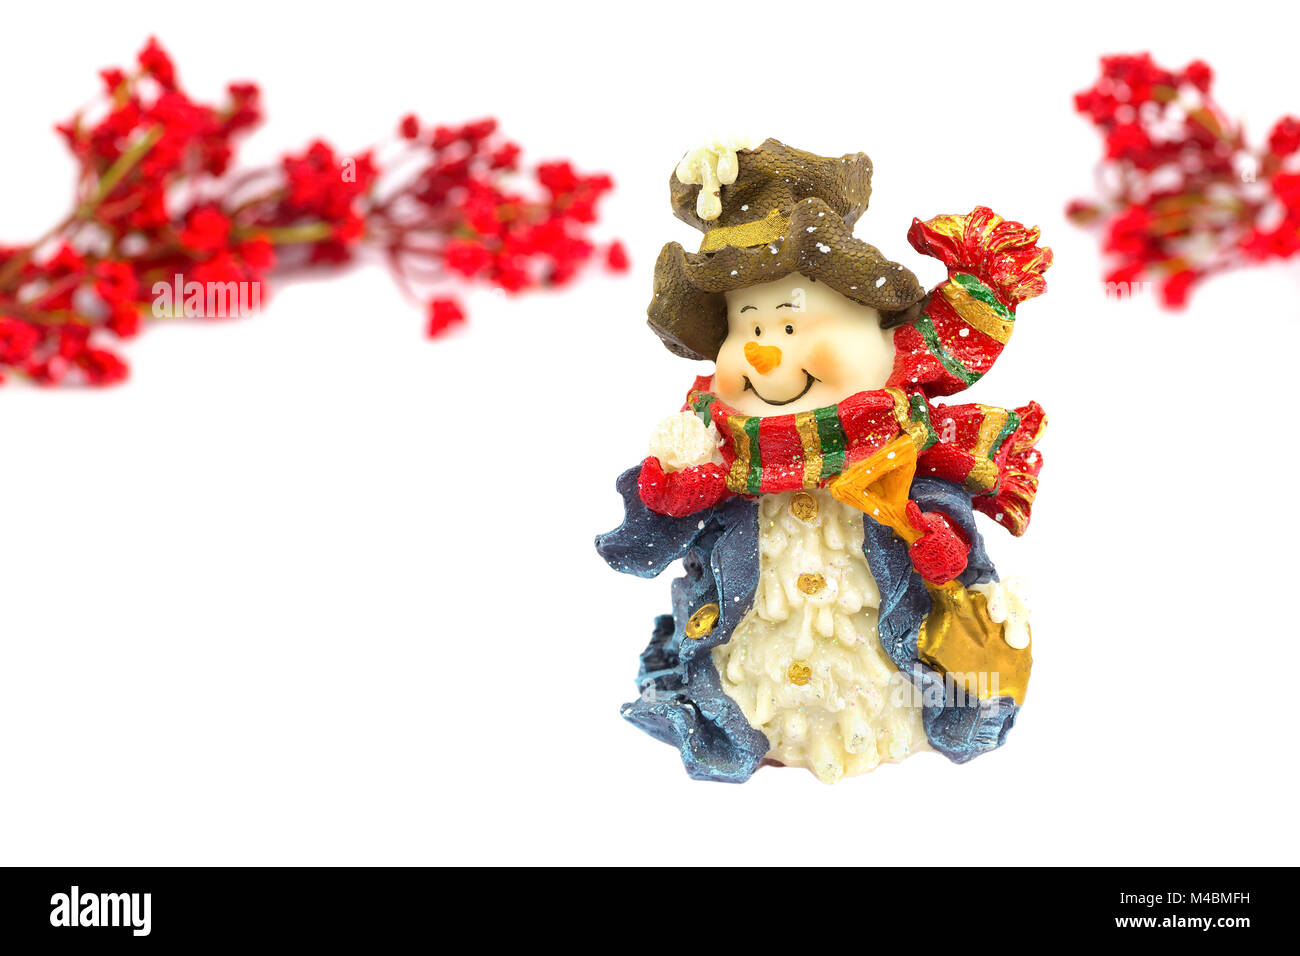 Cute snowman figurine with red berries on white background Stock Photo